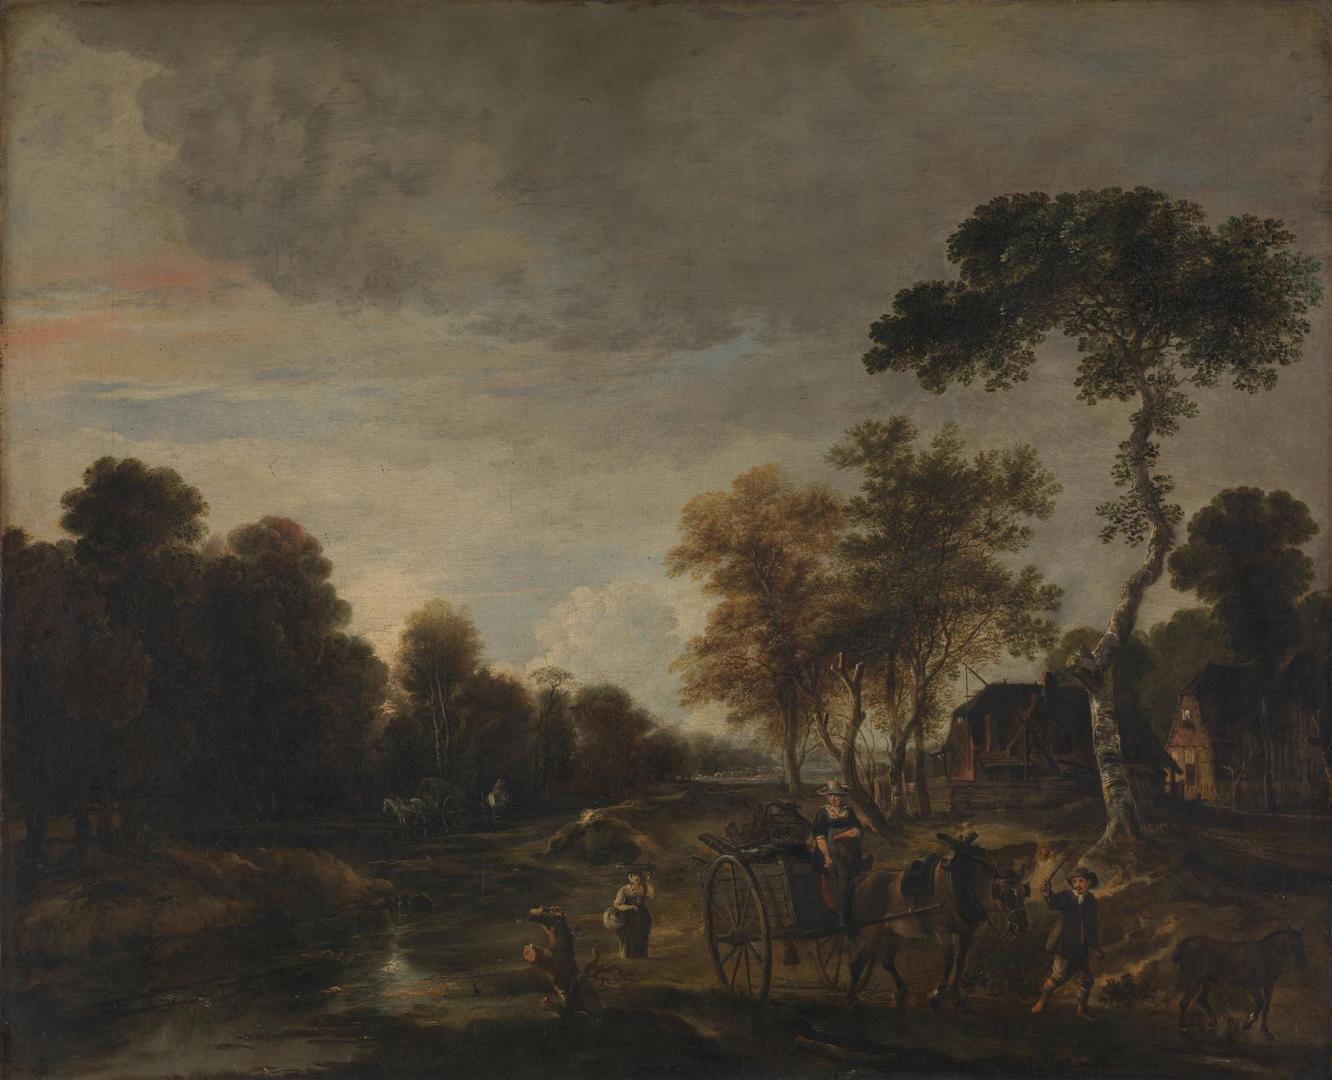 An Evening Landscape with a Horse and Cart by a Stream by Aert van der Neer